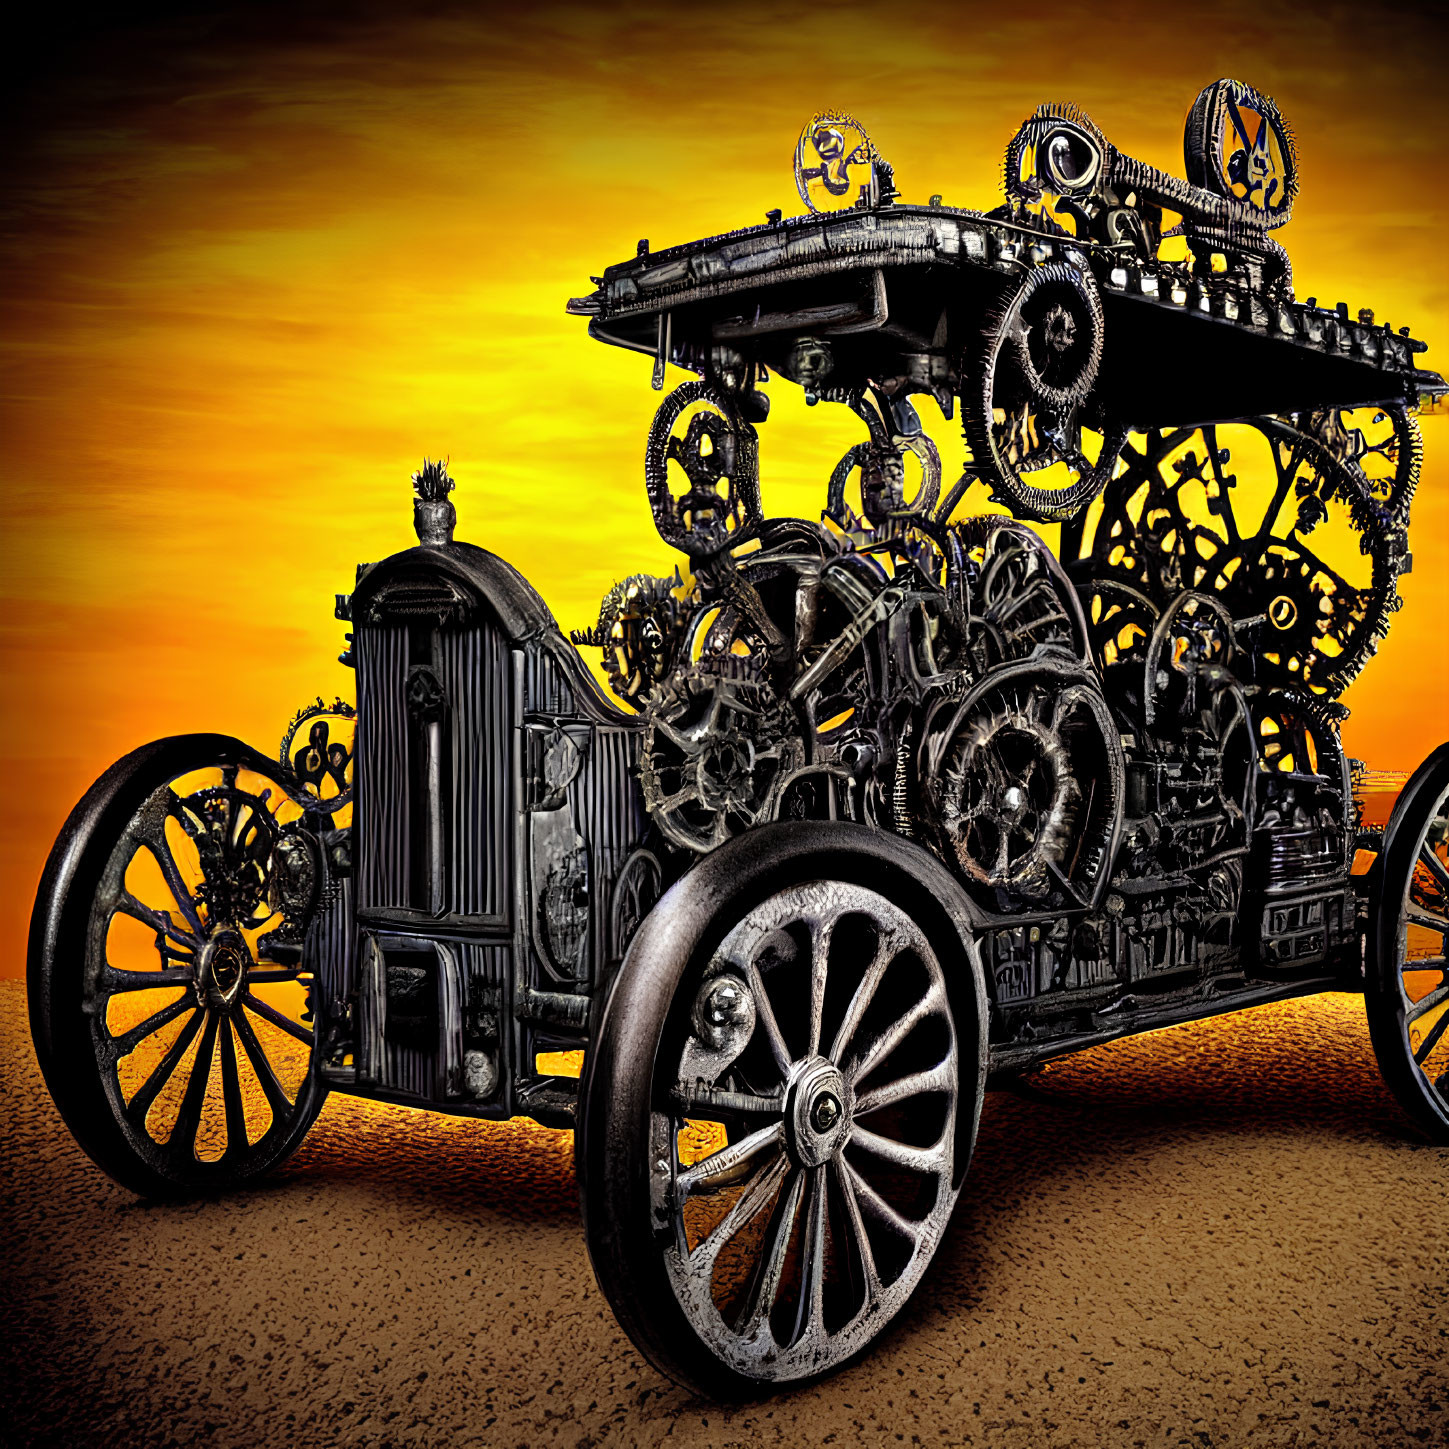 Steampunk-style vehicle with exposed gears against orange sky